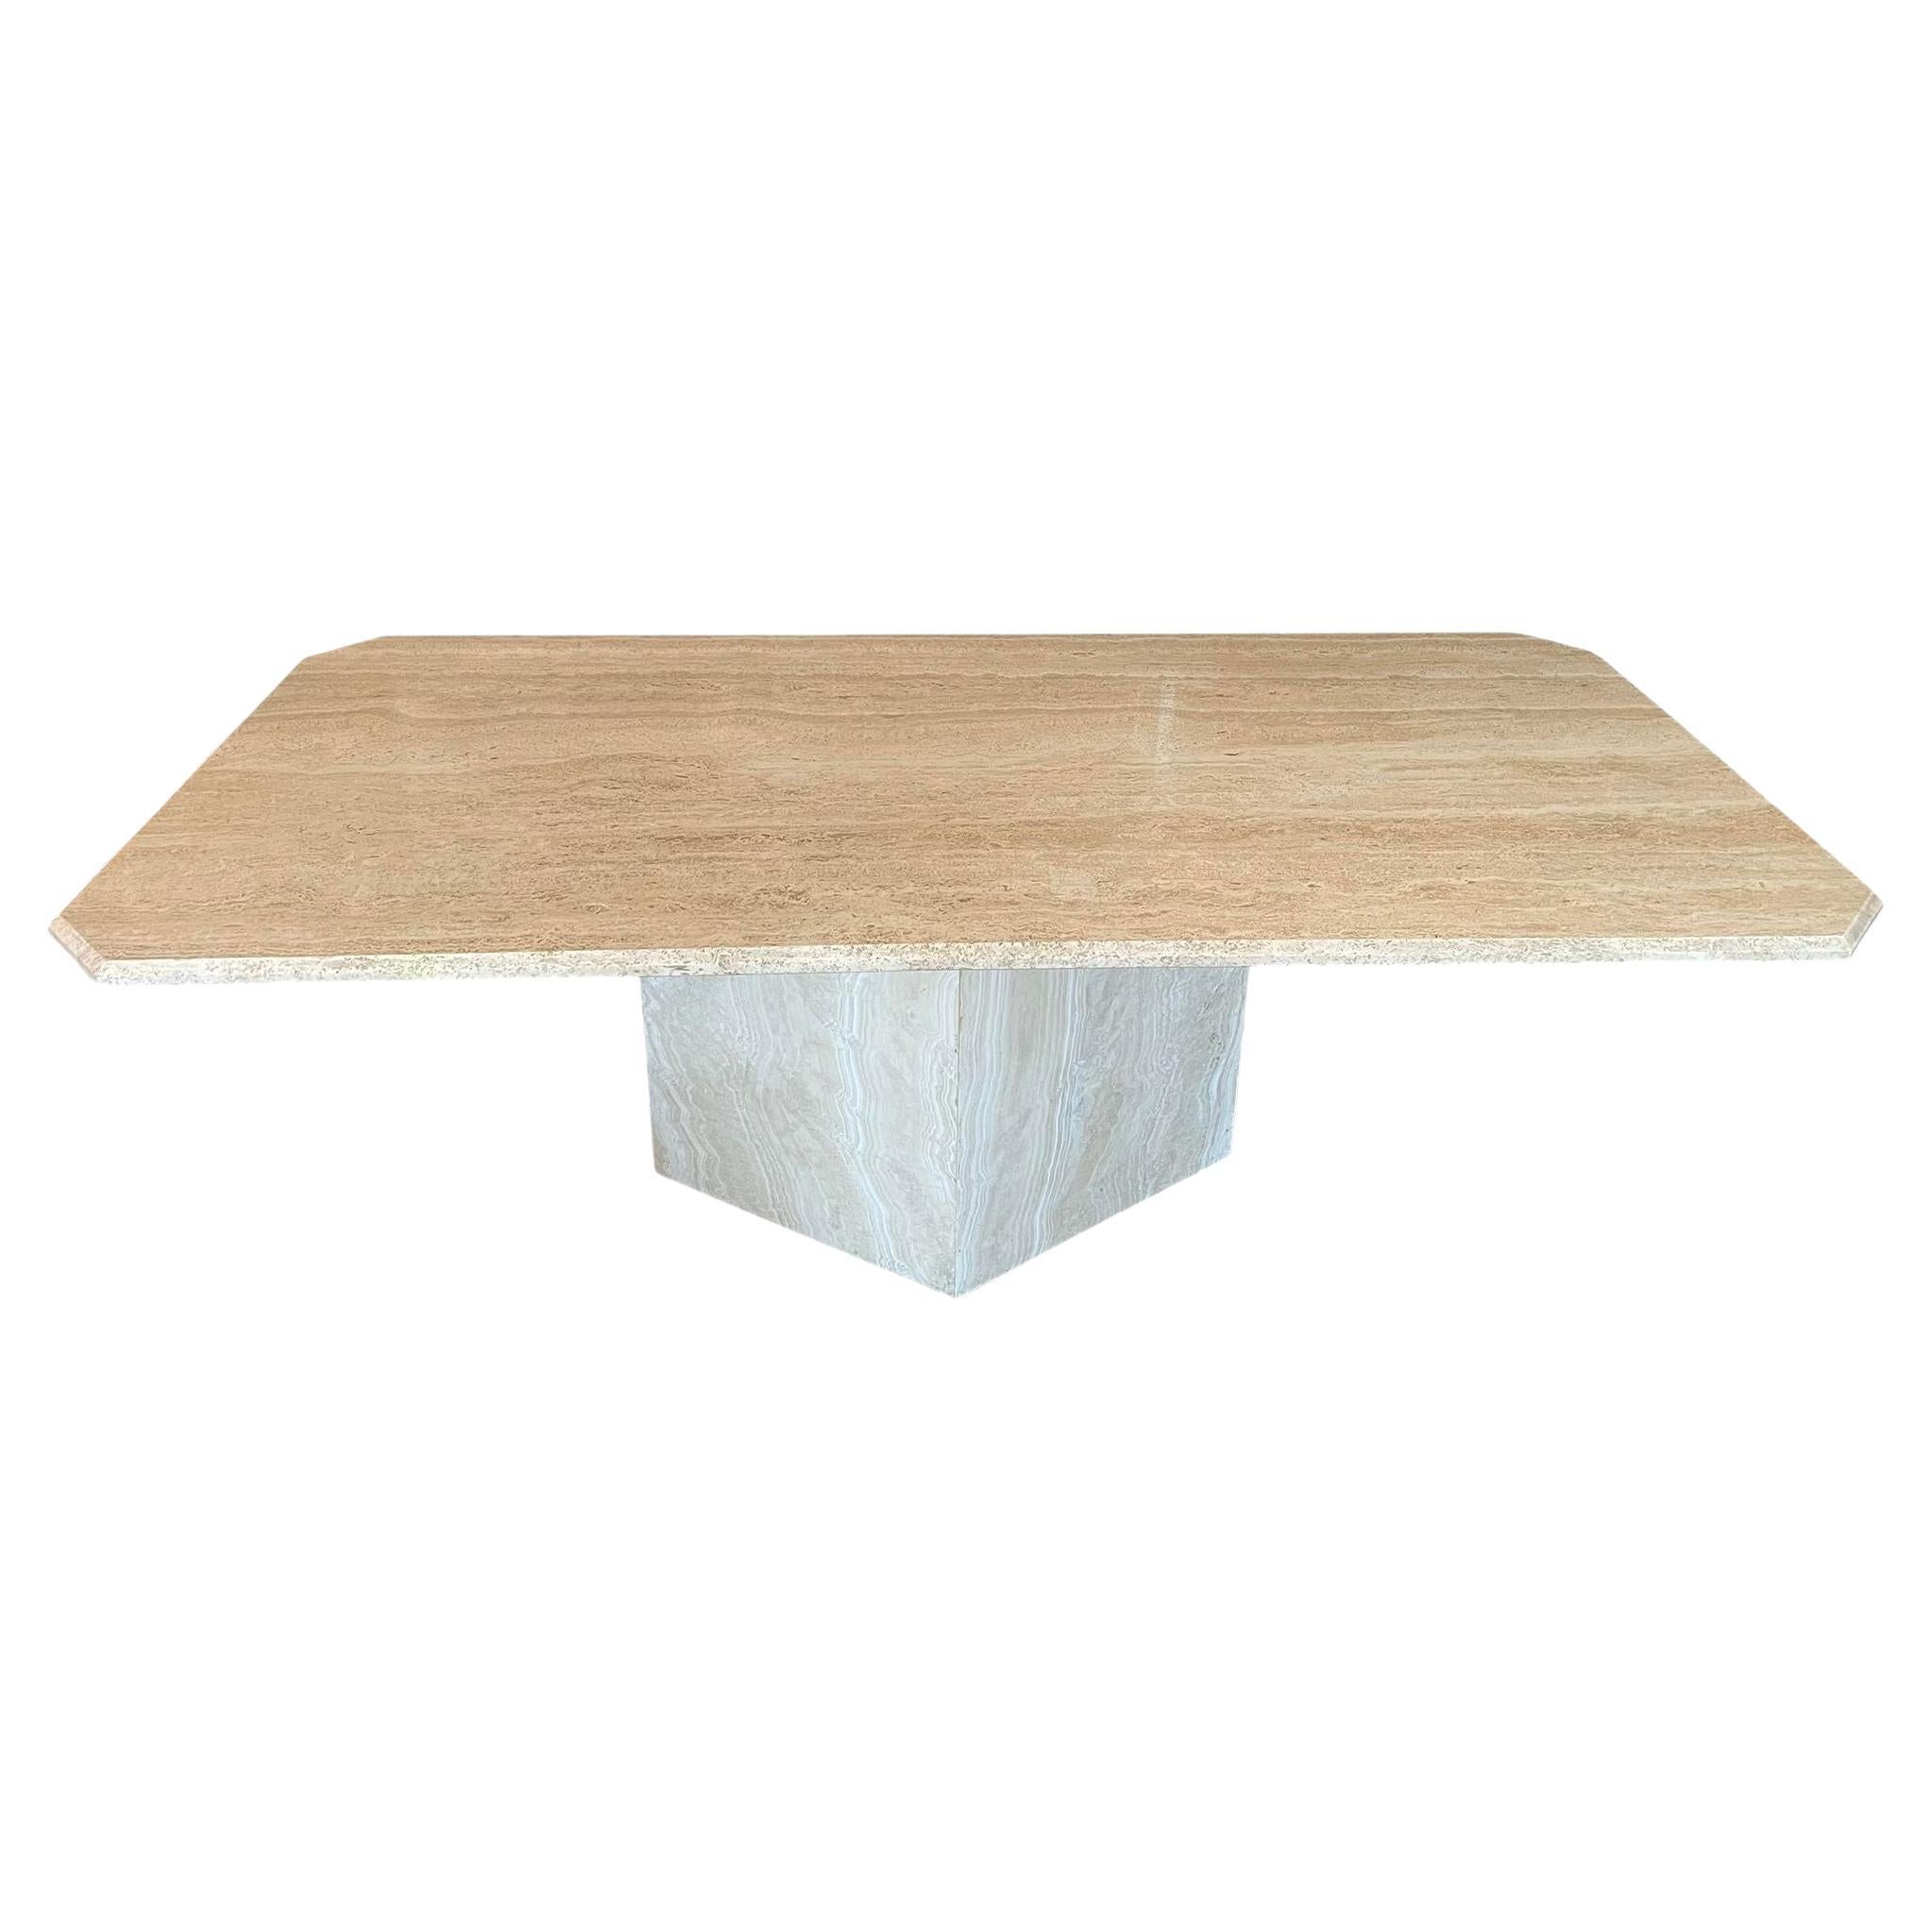 1970s, Postmodern Travertine Dining Table With Angled Edge Top and Base For Sale